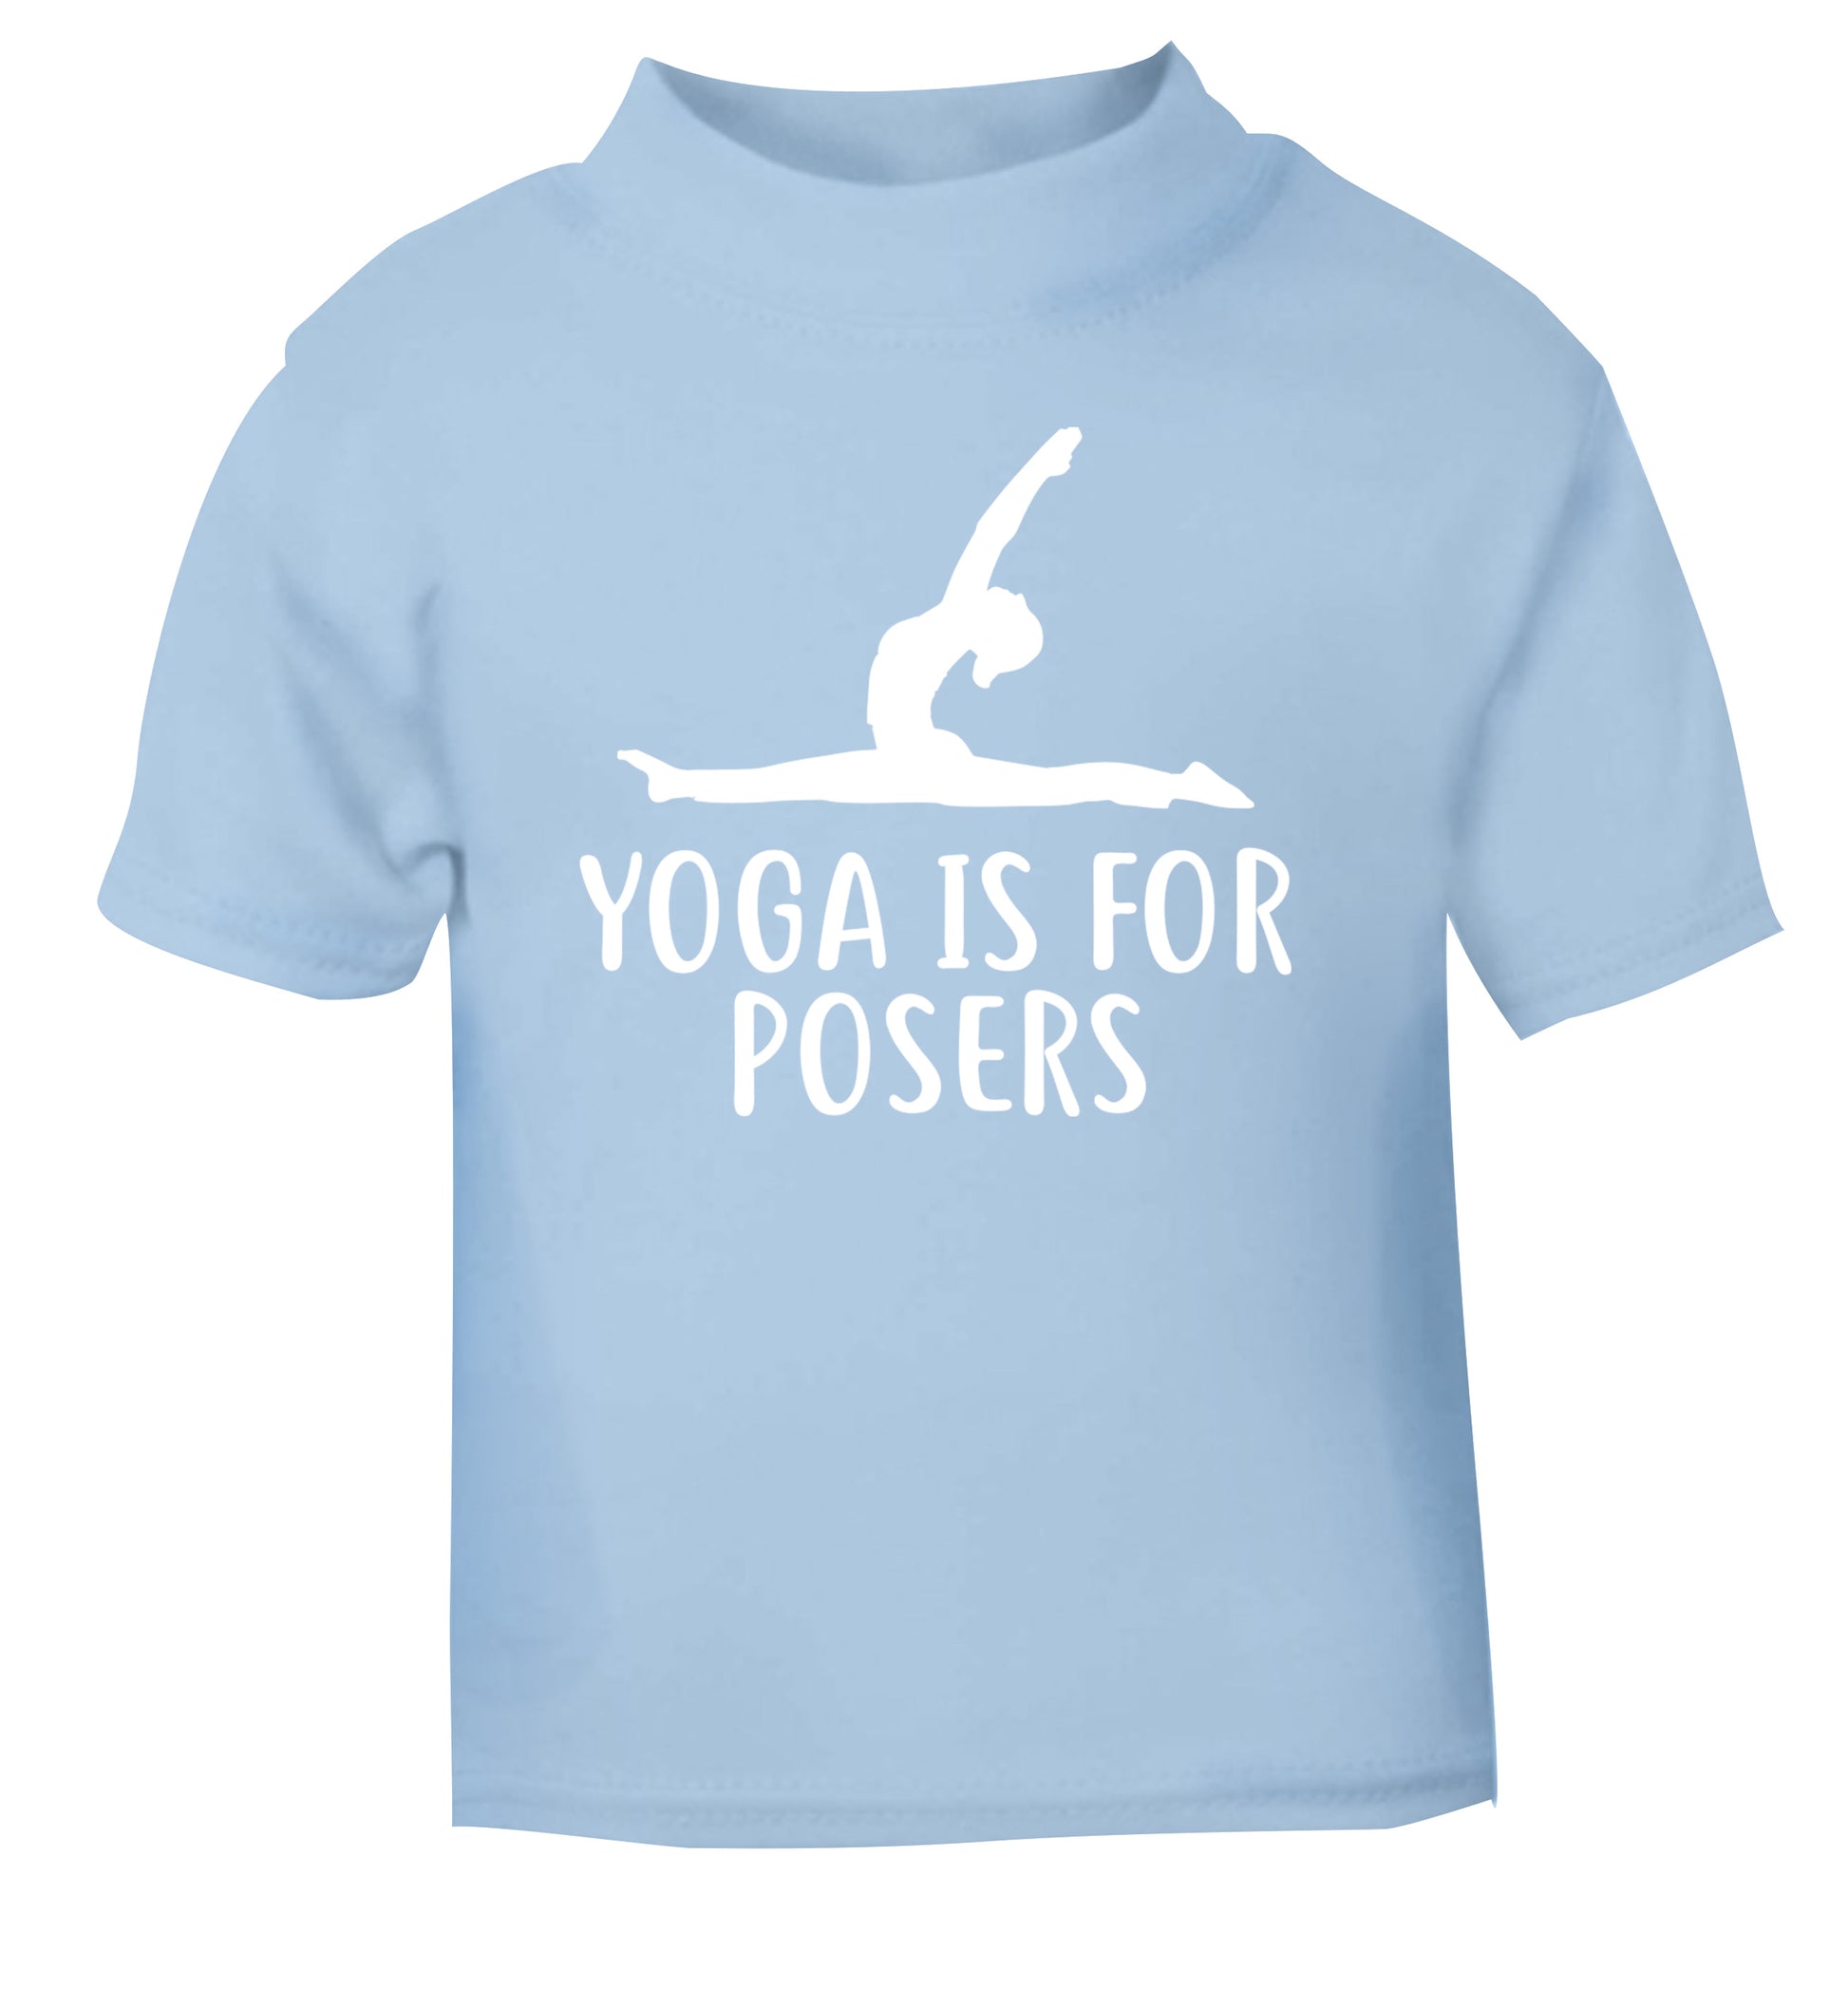 Yoga is for posers light blue Baby Toddler Tshirt 2 Years